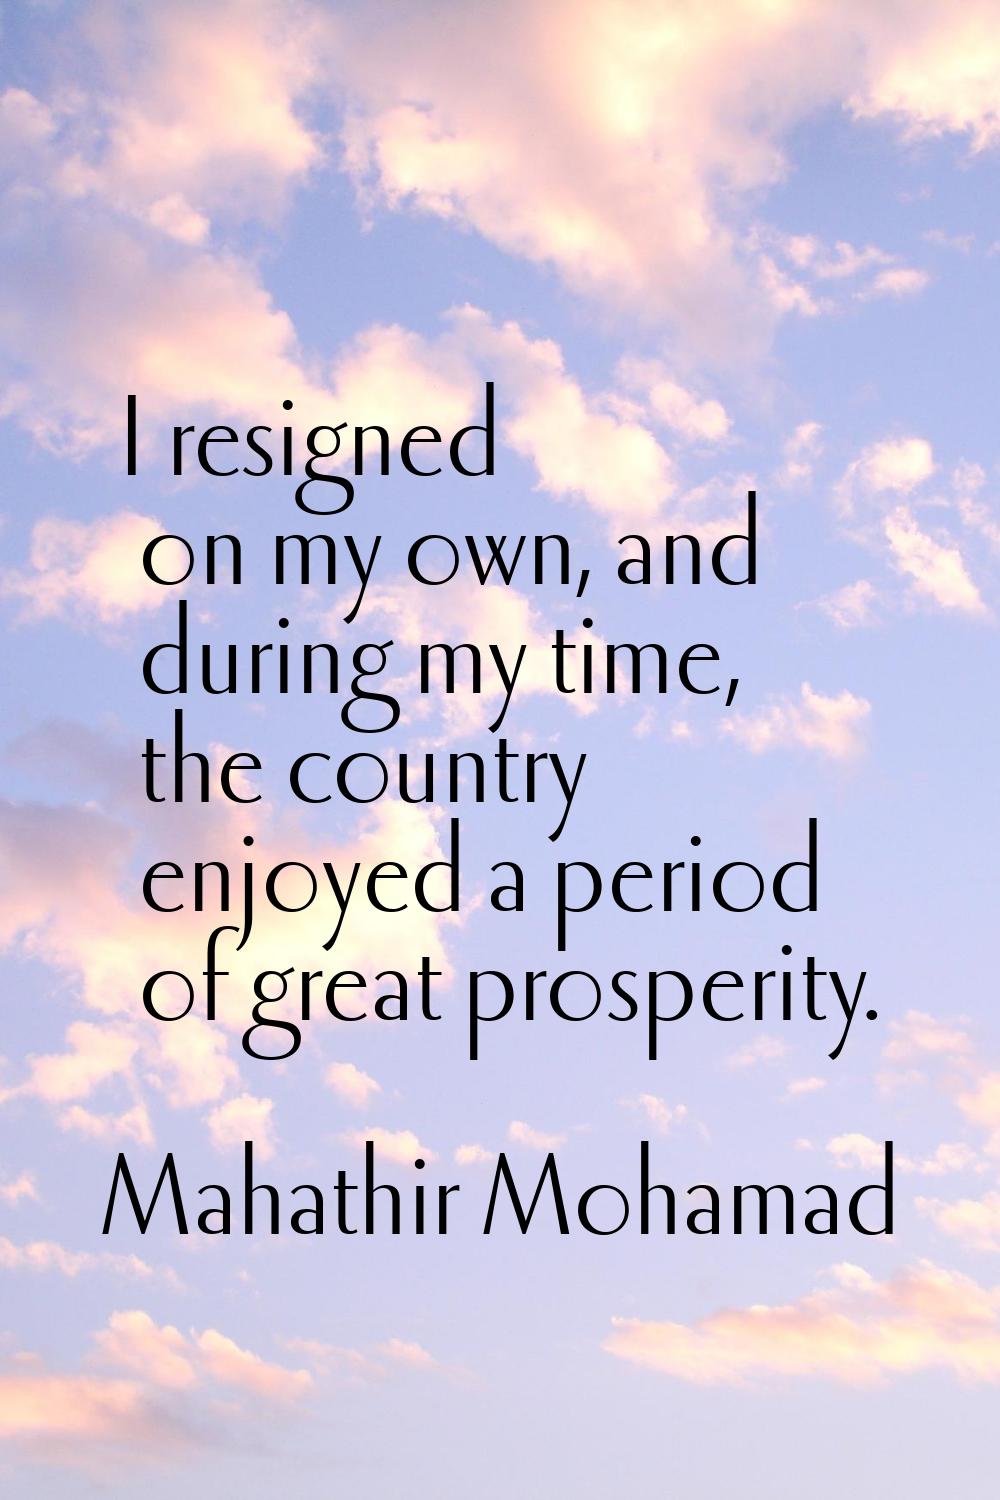 I resigned on my own, and during my time, the country enjoyed a period of great prosperity.